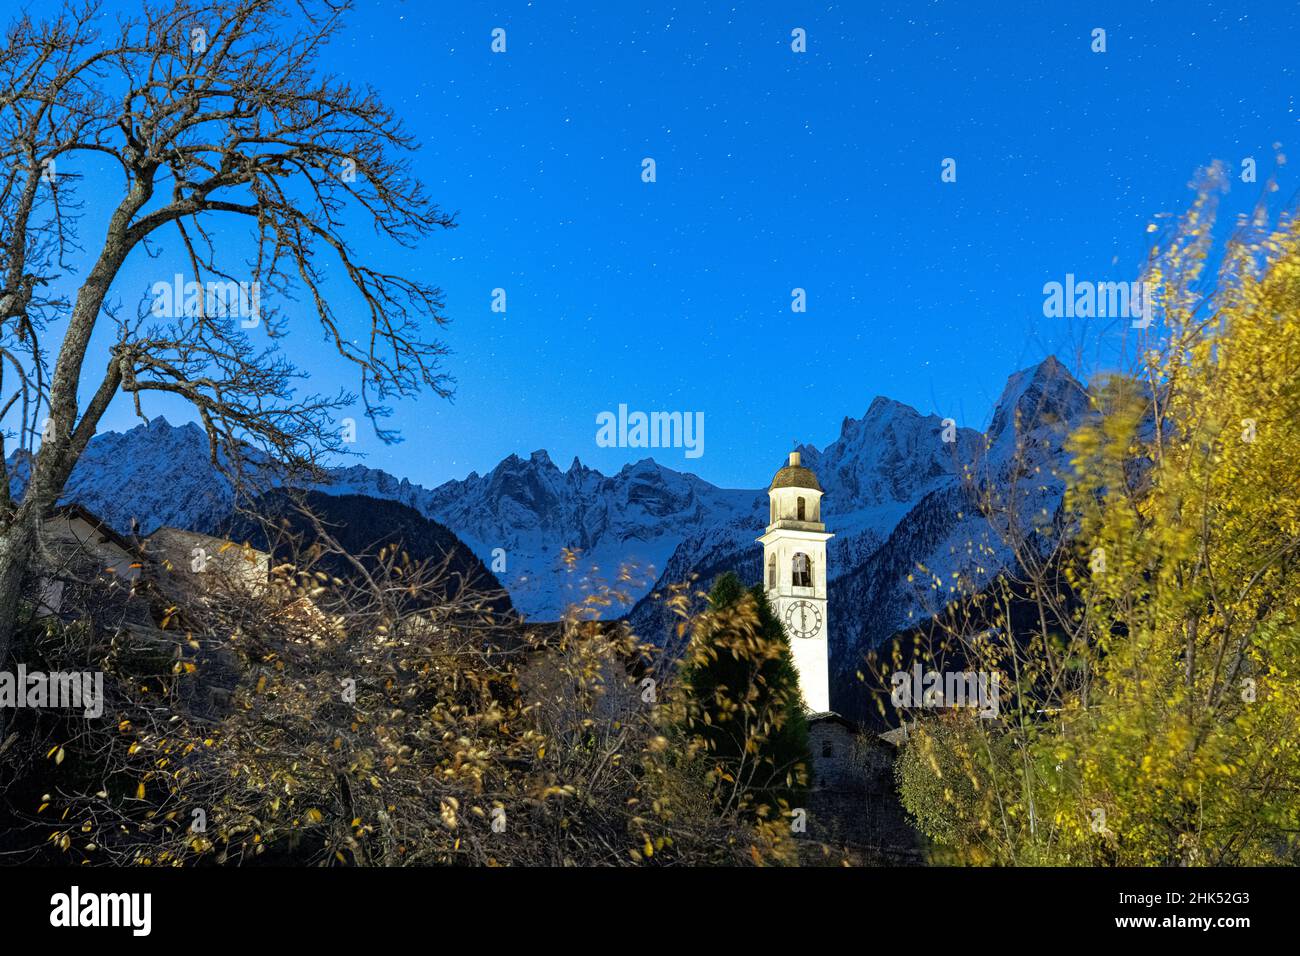 Starry night on the snowcapped Piz Badile and Cengalo peaks framed by the bell tower, Soglio, Graubunden Canton, Switzerland, Europe Stock Photo